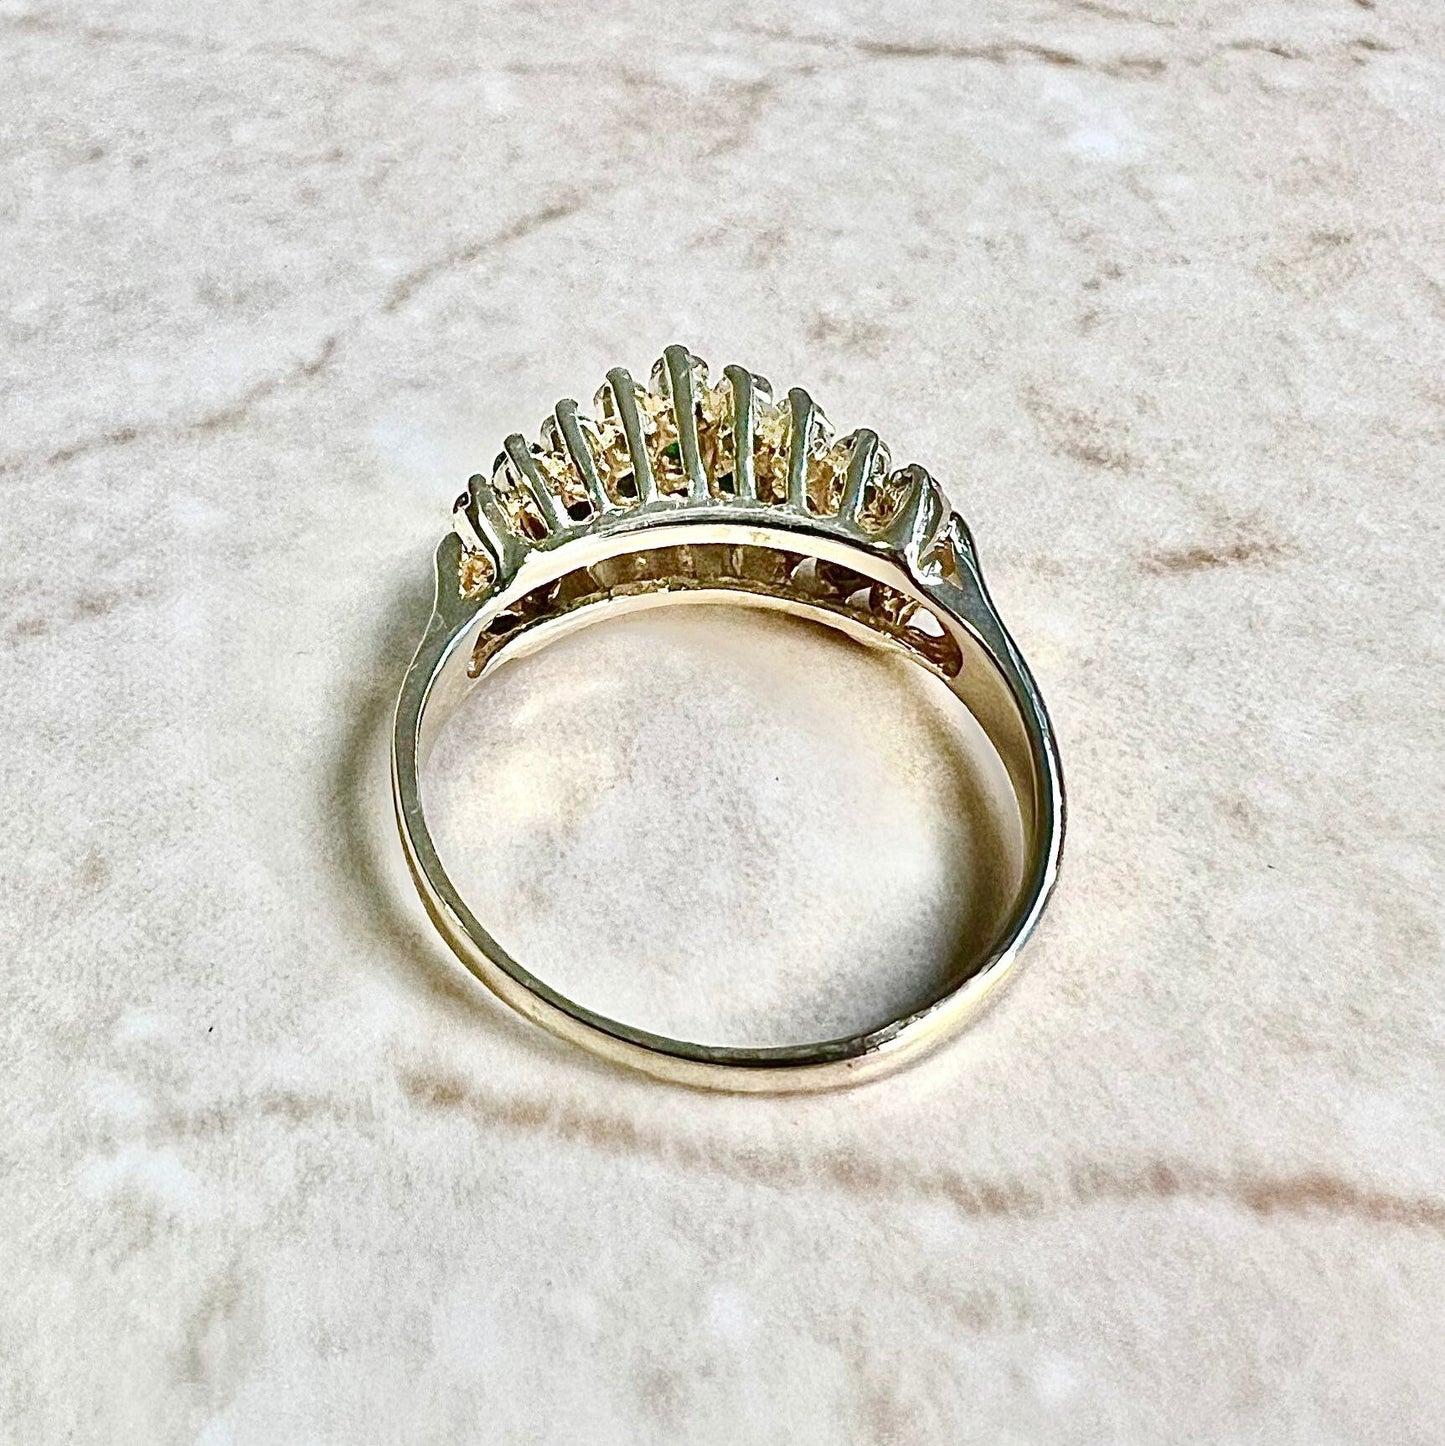 Vintage 14K Natural Emerald Band Ring - Yellow Gold Emerald Ring - Genuine Emerald Ring - Best Gifts For Her - April May Birthstone Gifts